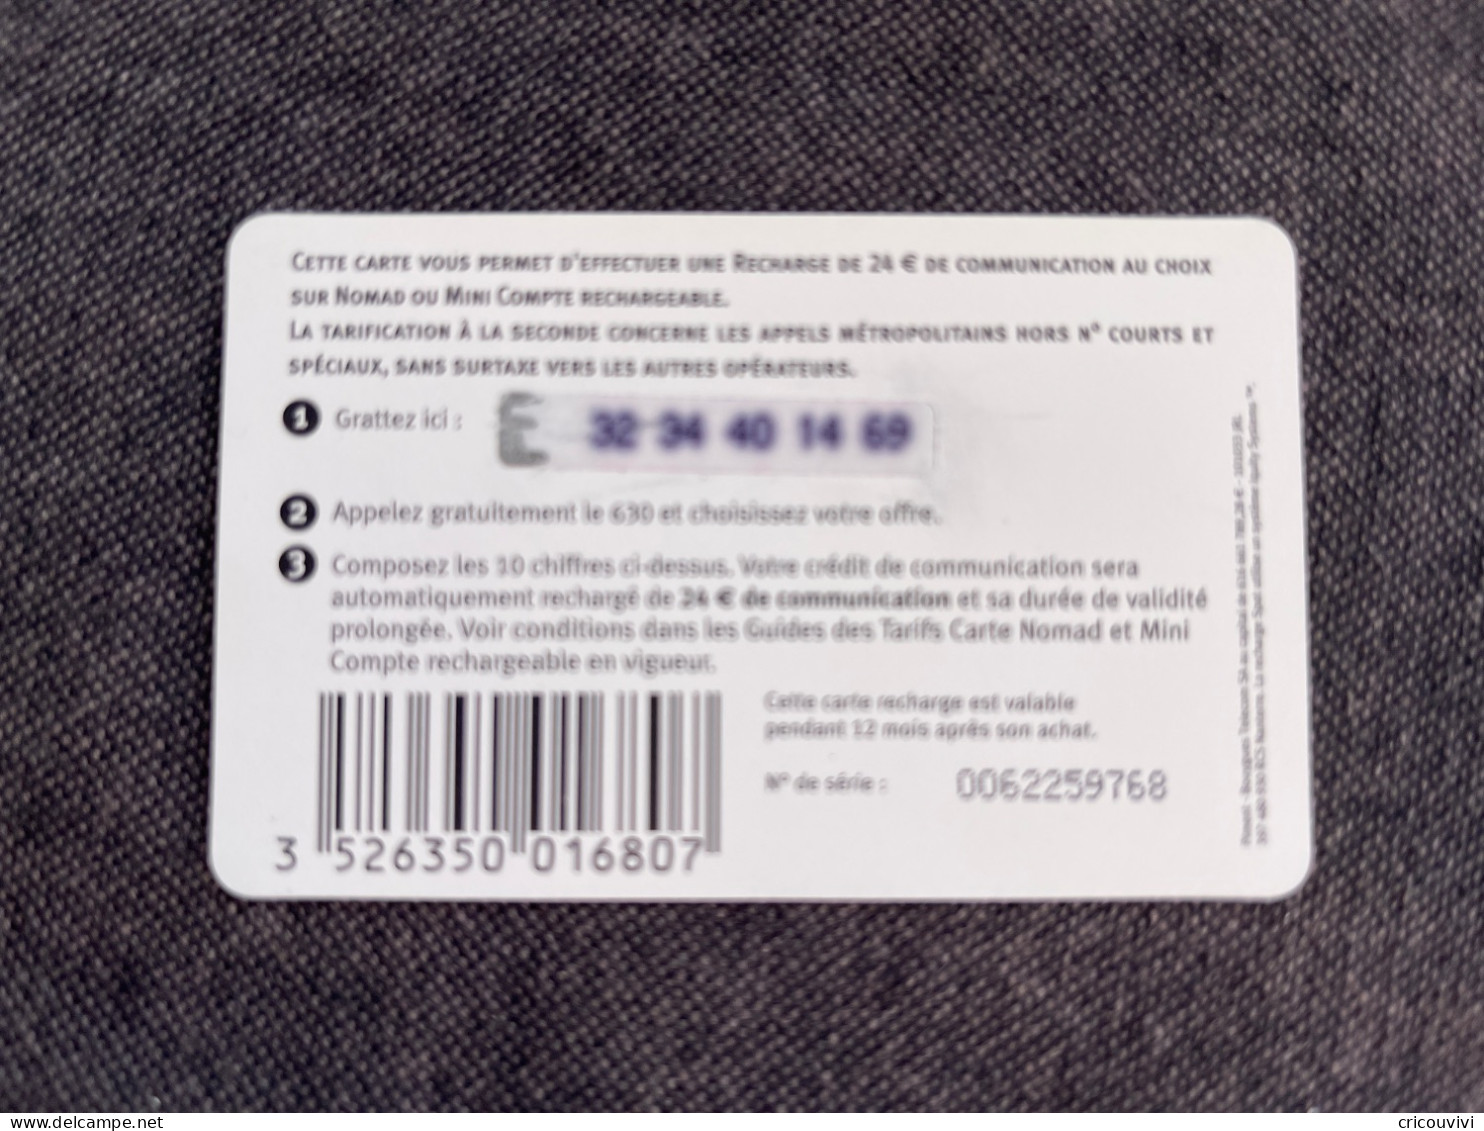 Nomad / Bouygues Nom Pu25 - Cellphone Cards (refills)